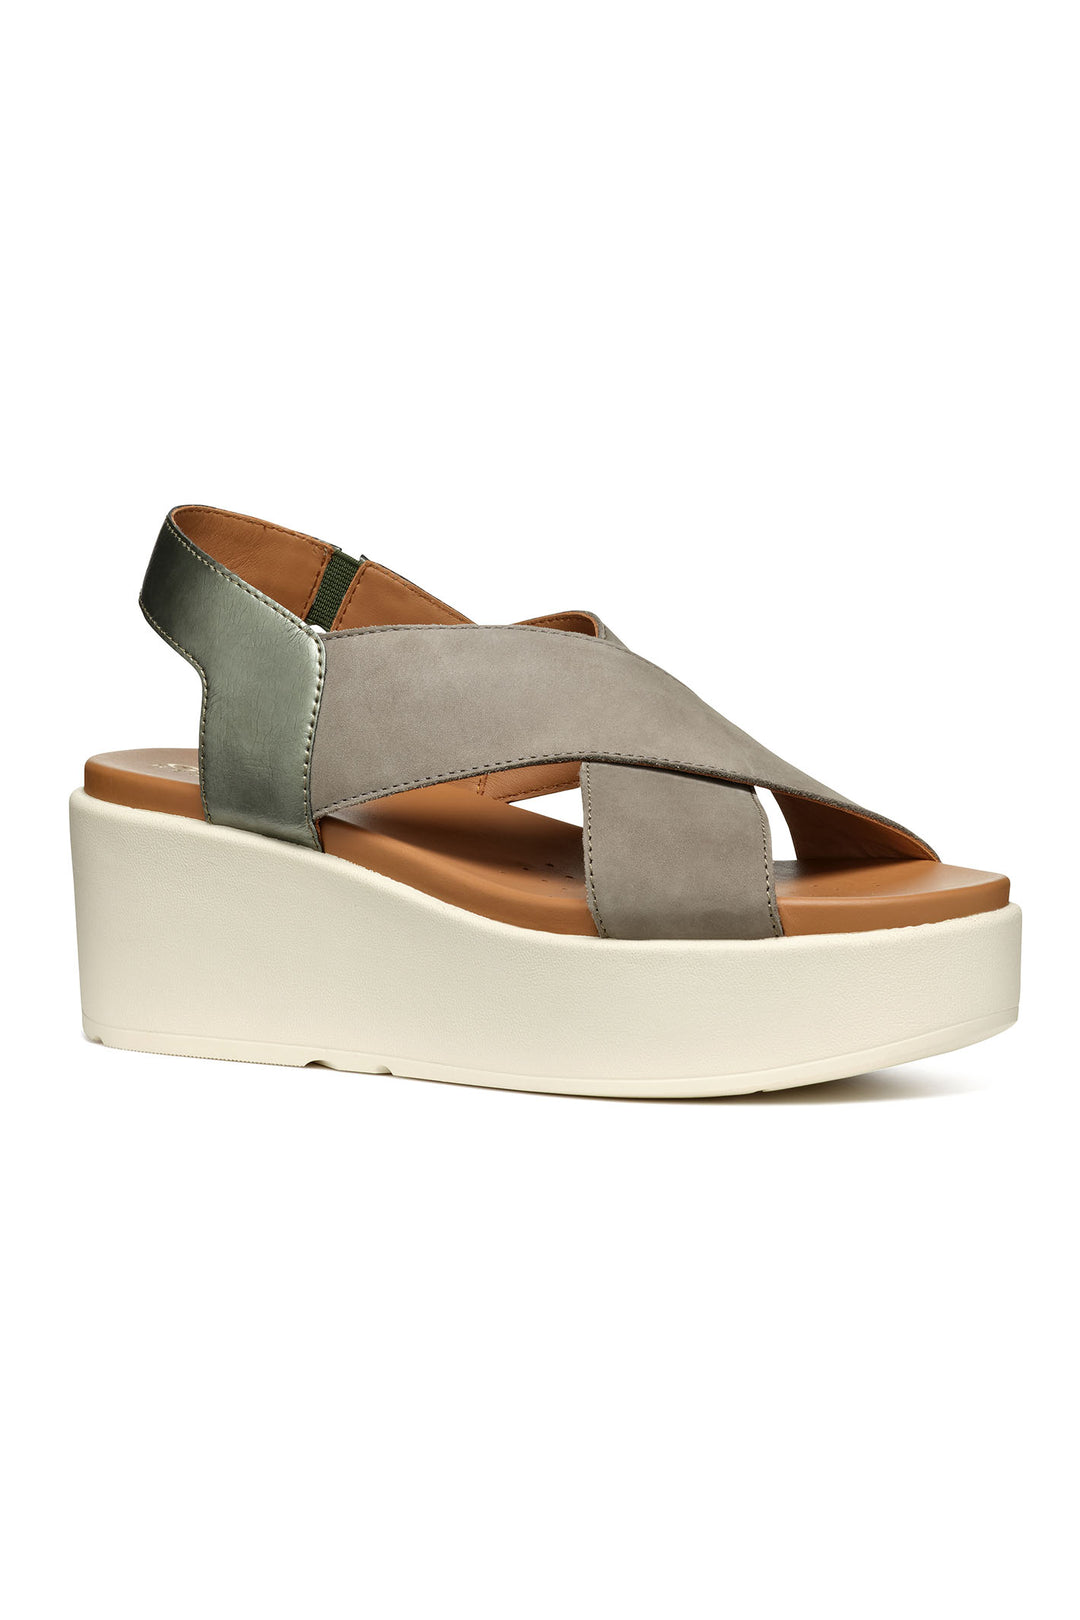 Geox Xand 2.2s Sage Green Wedge Sandal - Dotique